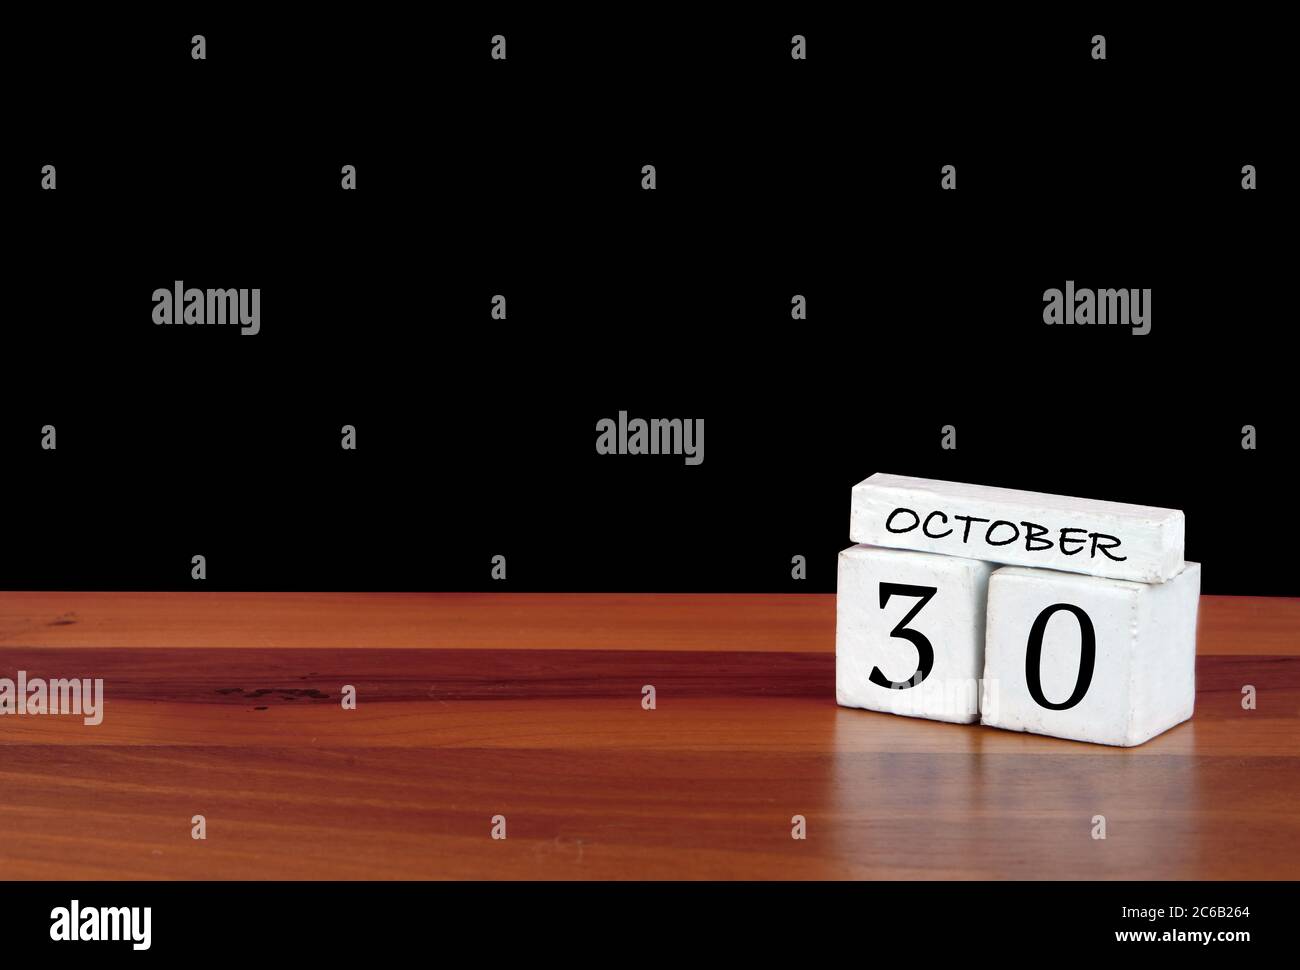 30 October calendar month. 30 days of the month. Reflected calendar on wooden floor with black background Stock Photo